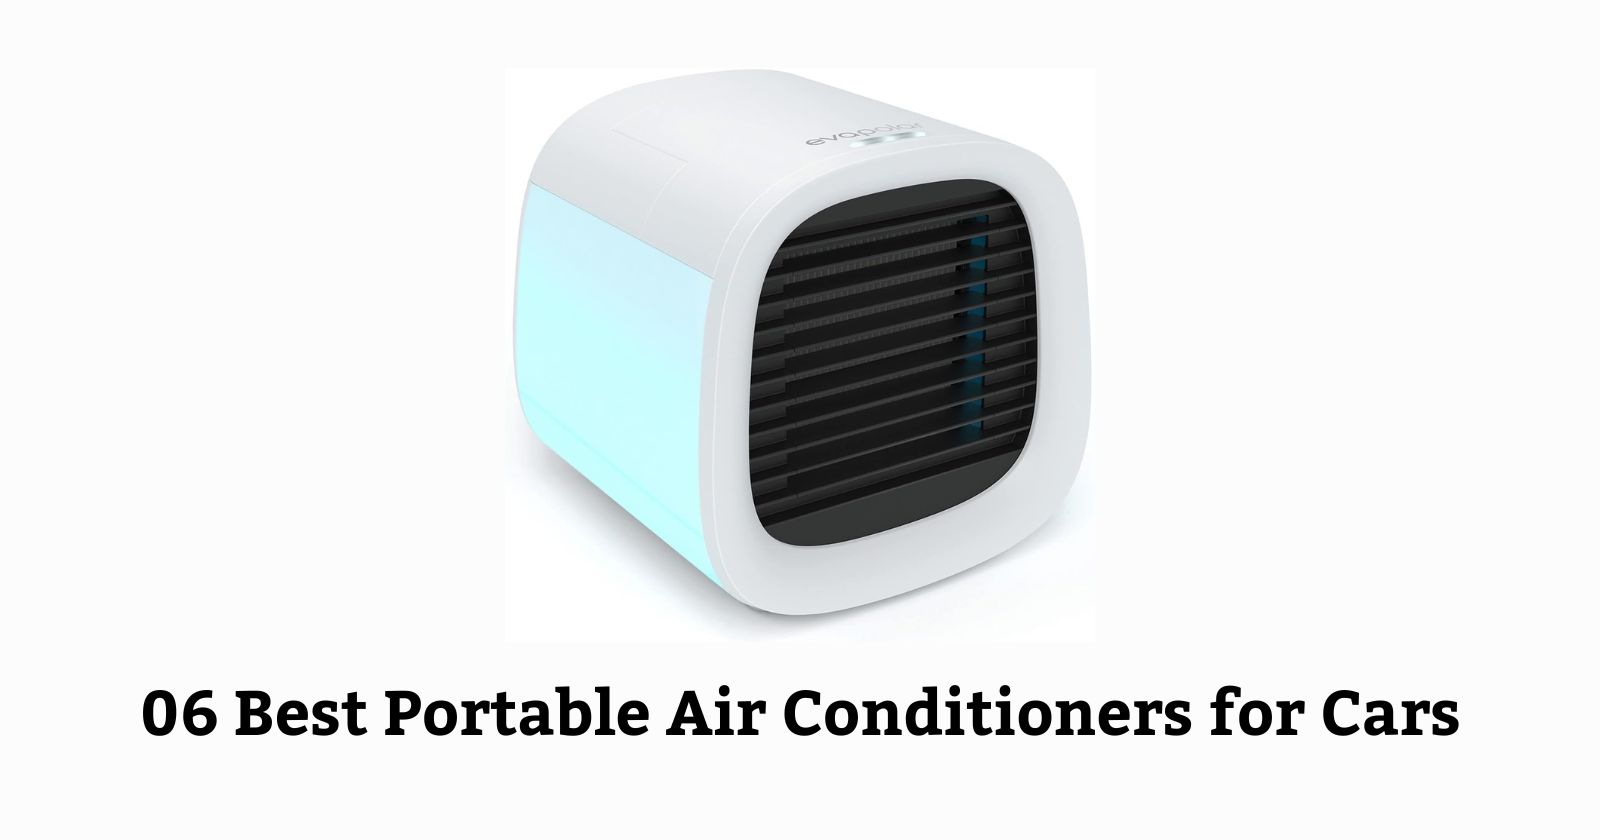 06 Best Portable Air Conditioners for Cars